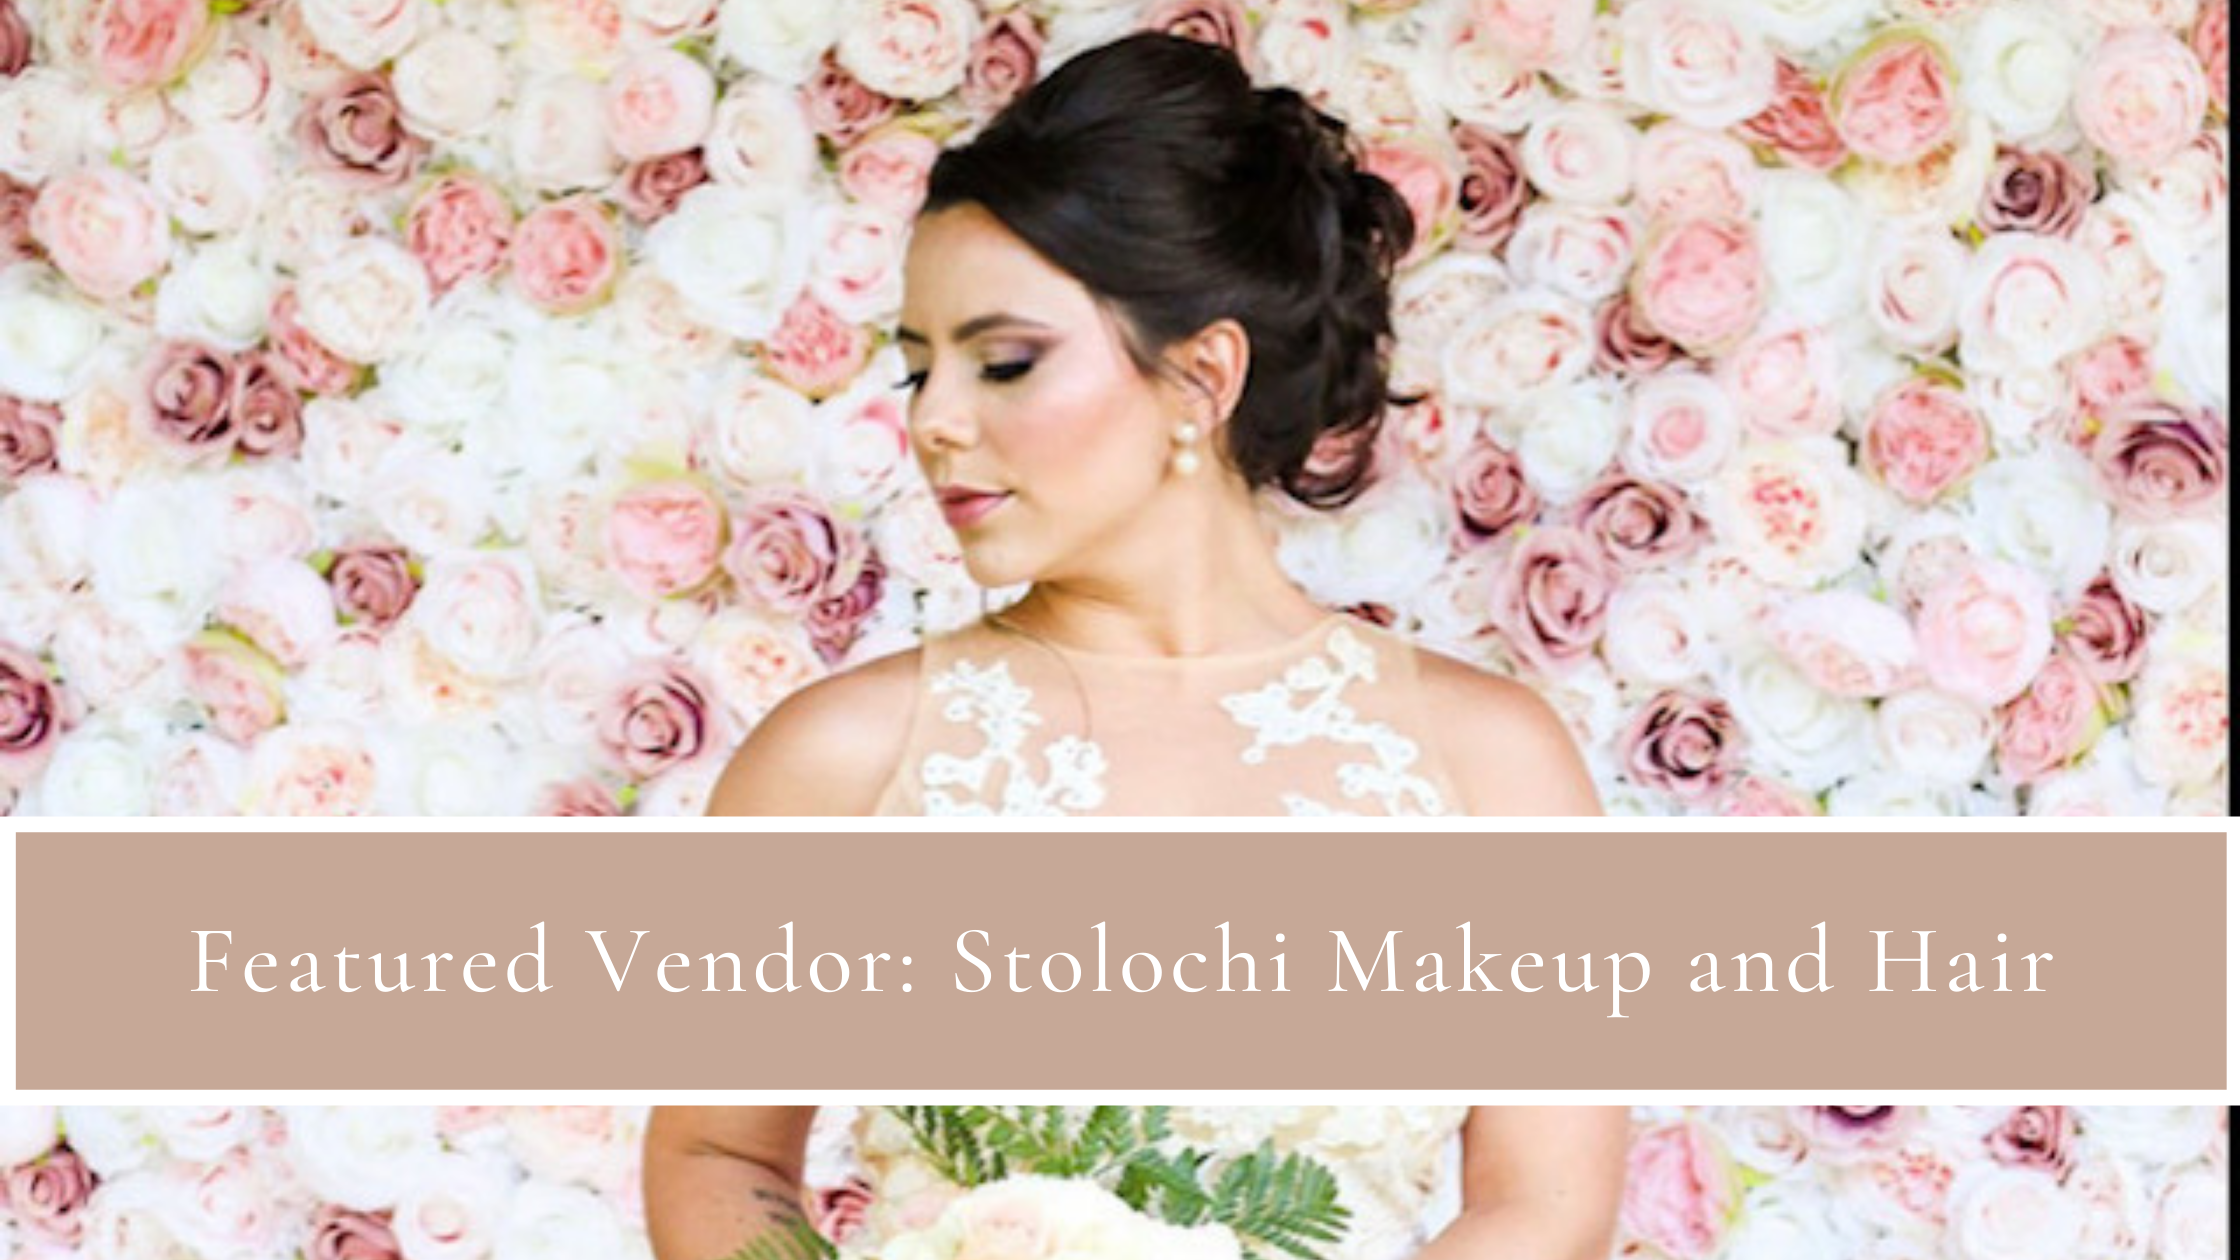 Featured Vendor: Stolochi Makeup and Hair